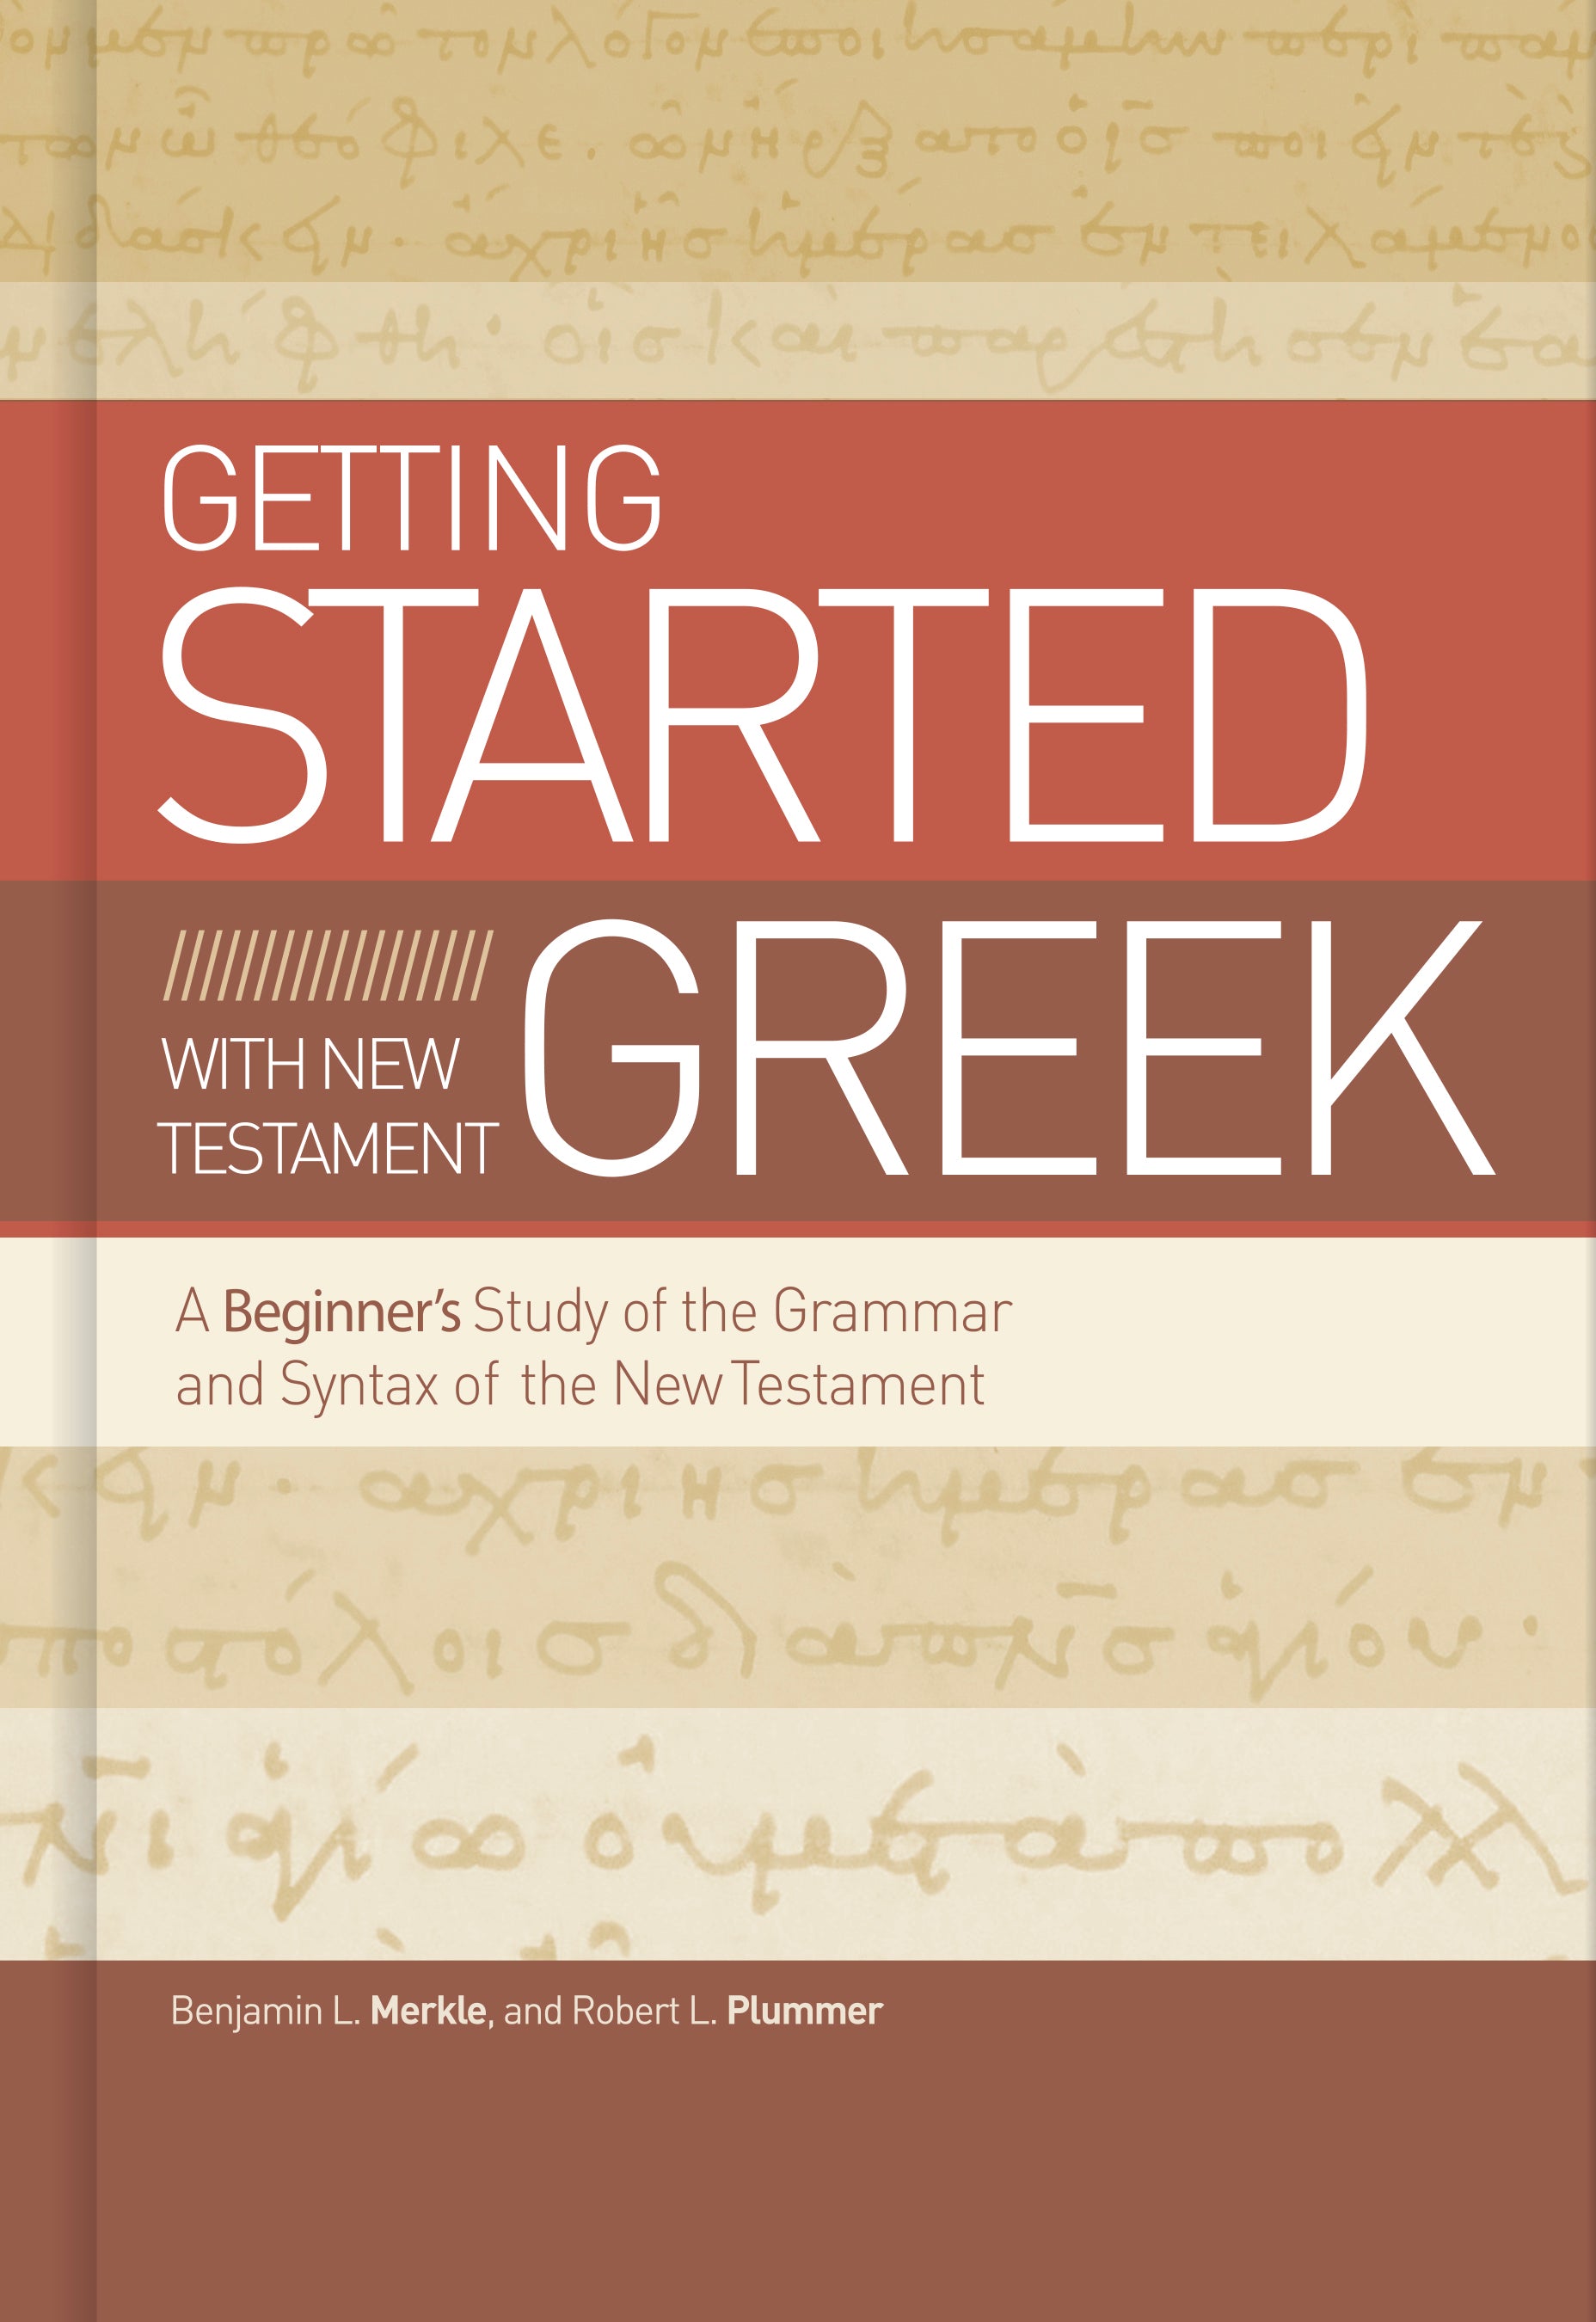 Image of Beginning with New Testament Greek other